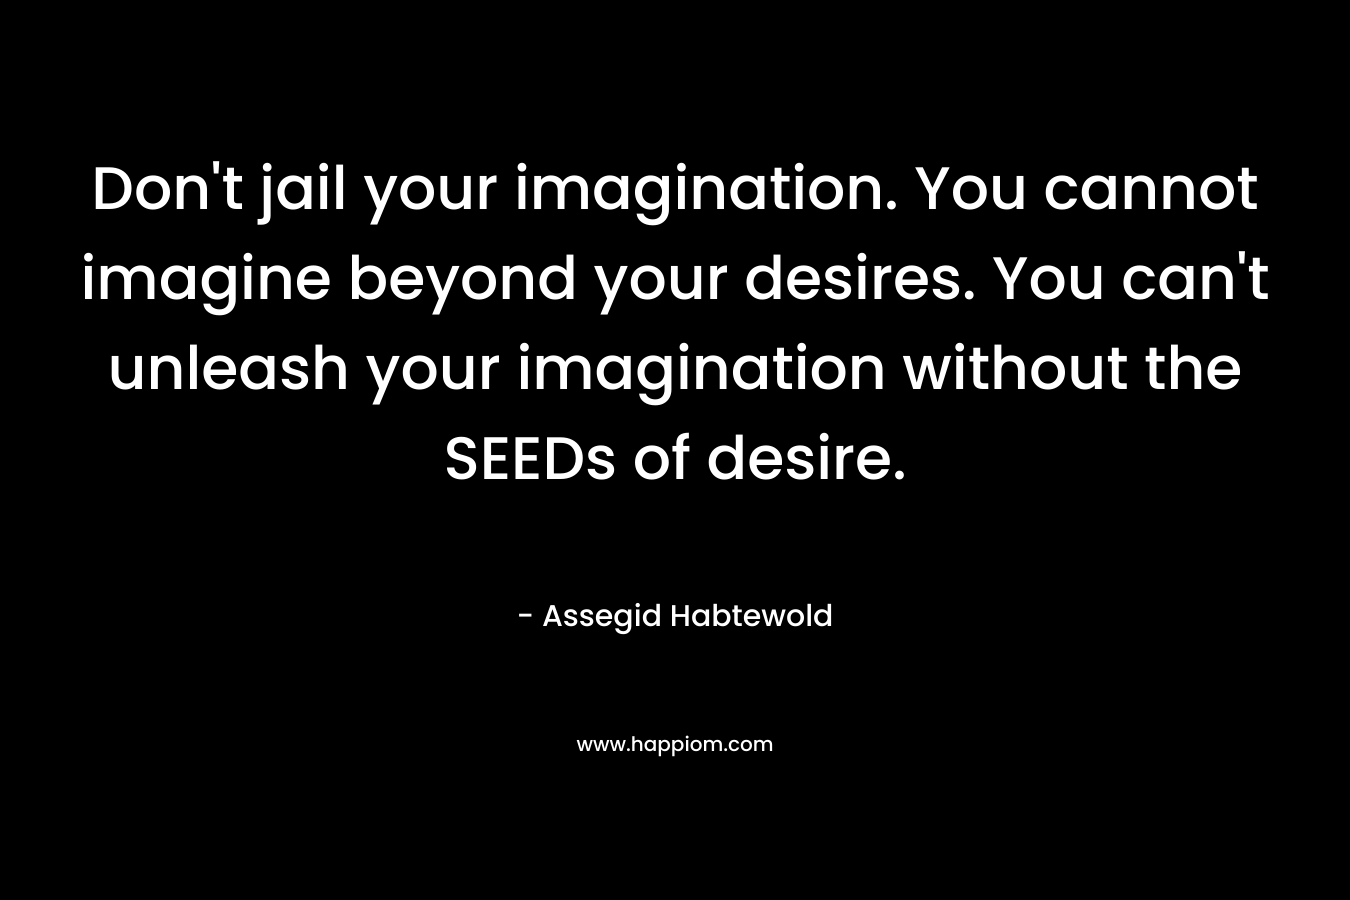 Don't jail your imagination. You cannot imagine beyond your desires. You can't unleash your imagination without the SEEDs of desire.